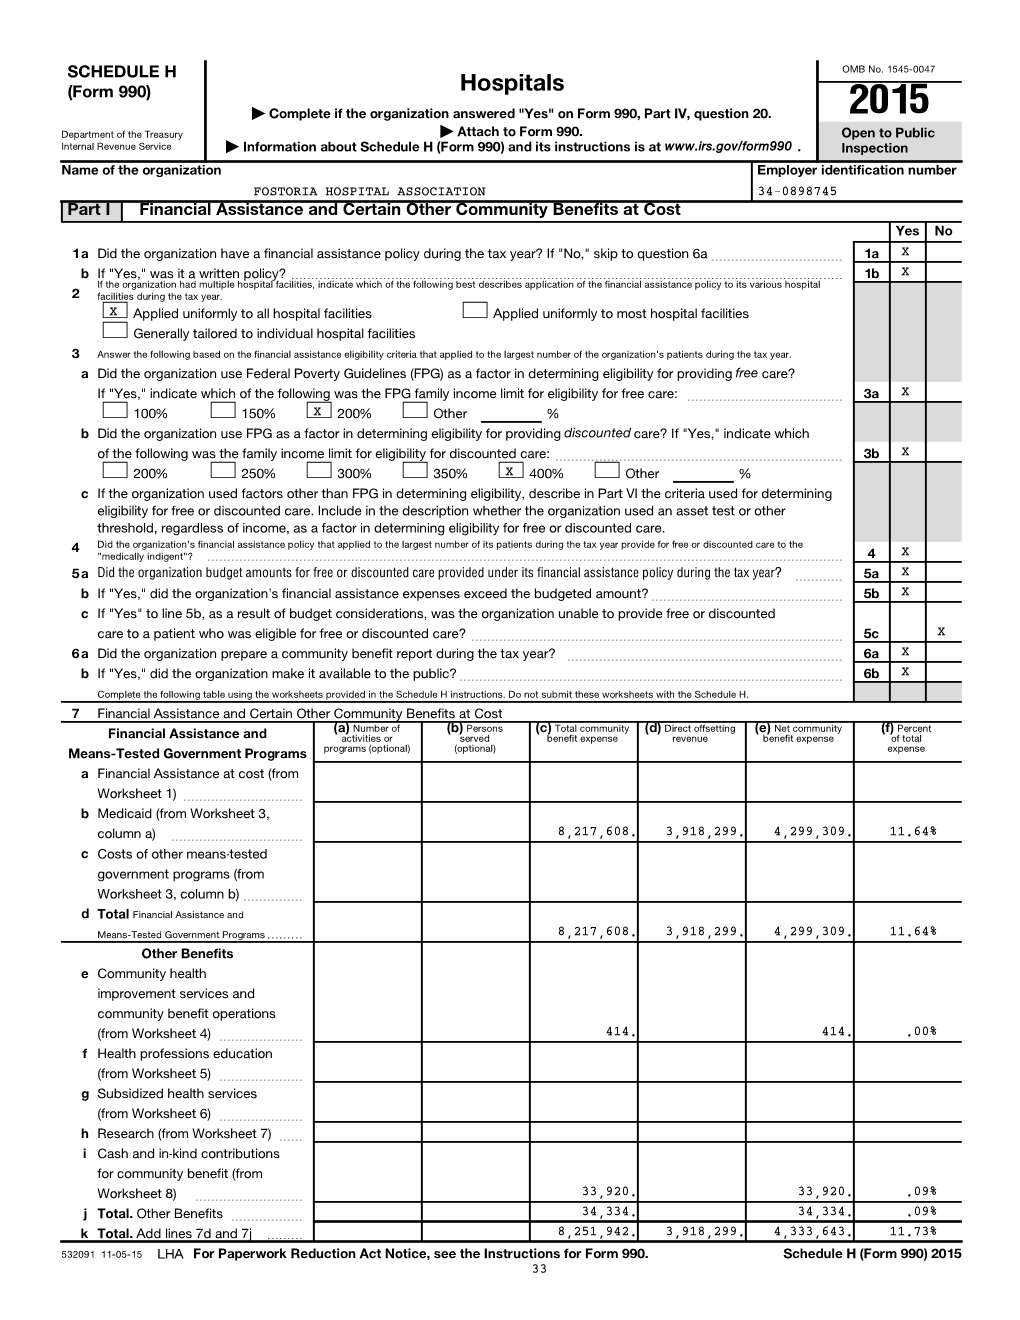 Hospitals | Complete If the Organization Answered "Yes" on Form 990, Part IV, Question 20